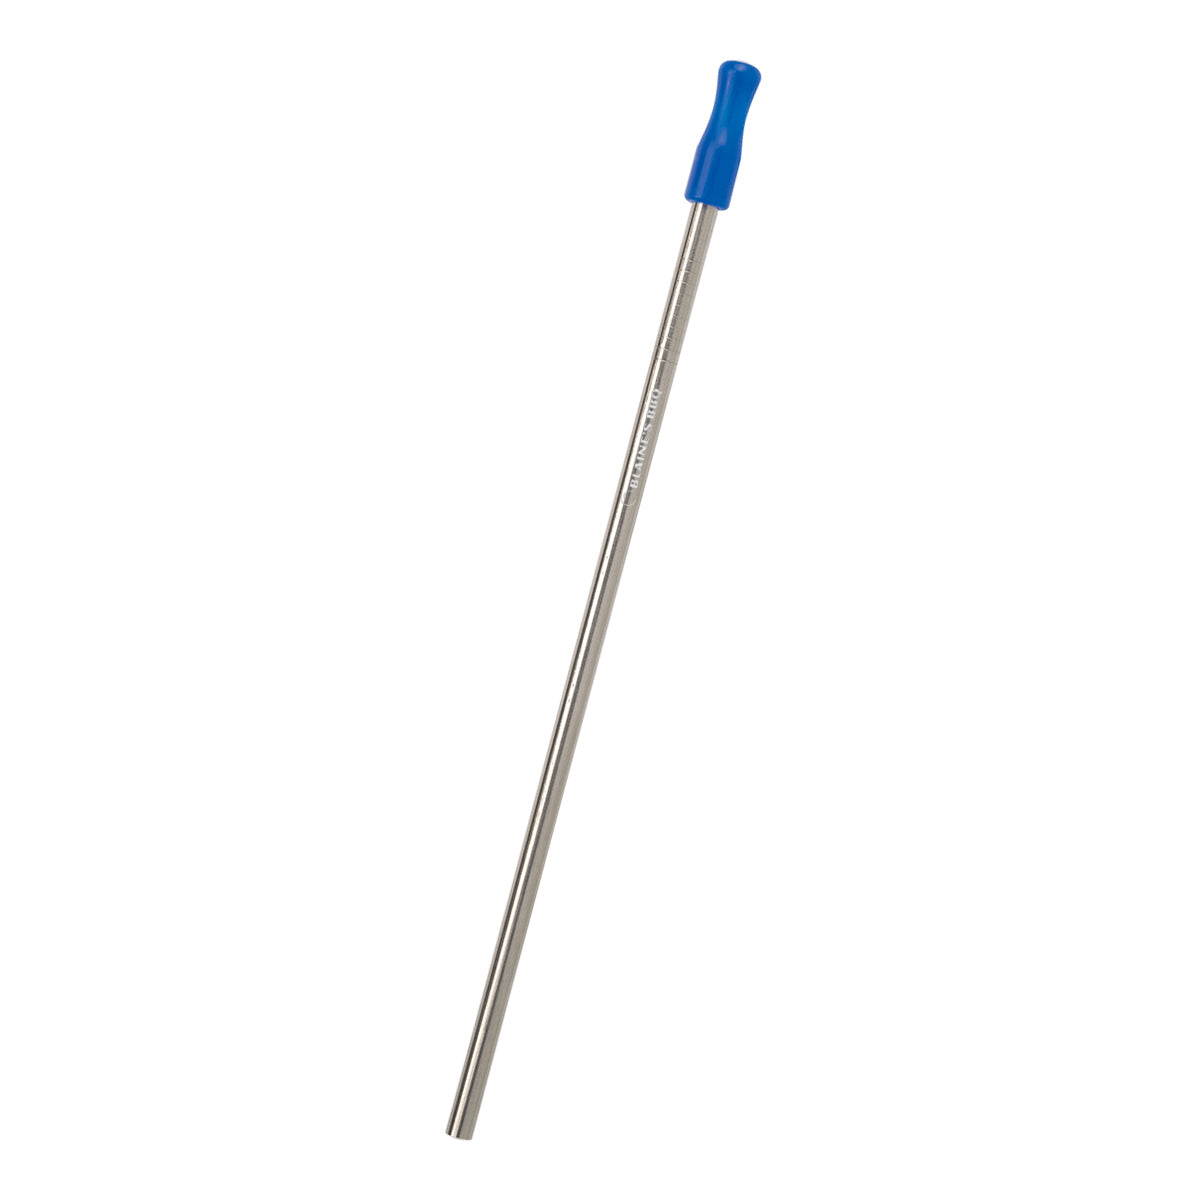 Customizable Stainless Steel Straw Kit with Cotton Pouch in blue.